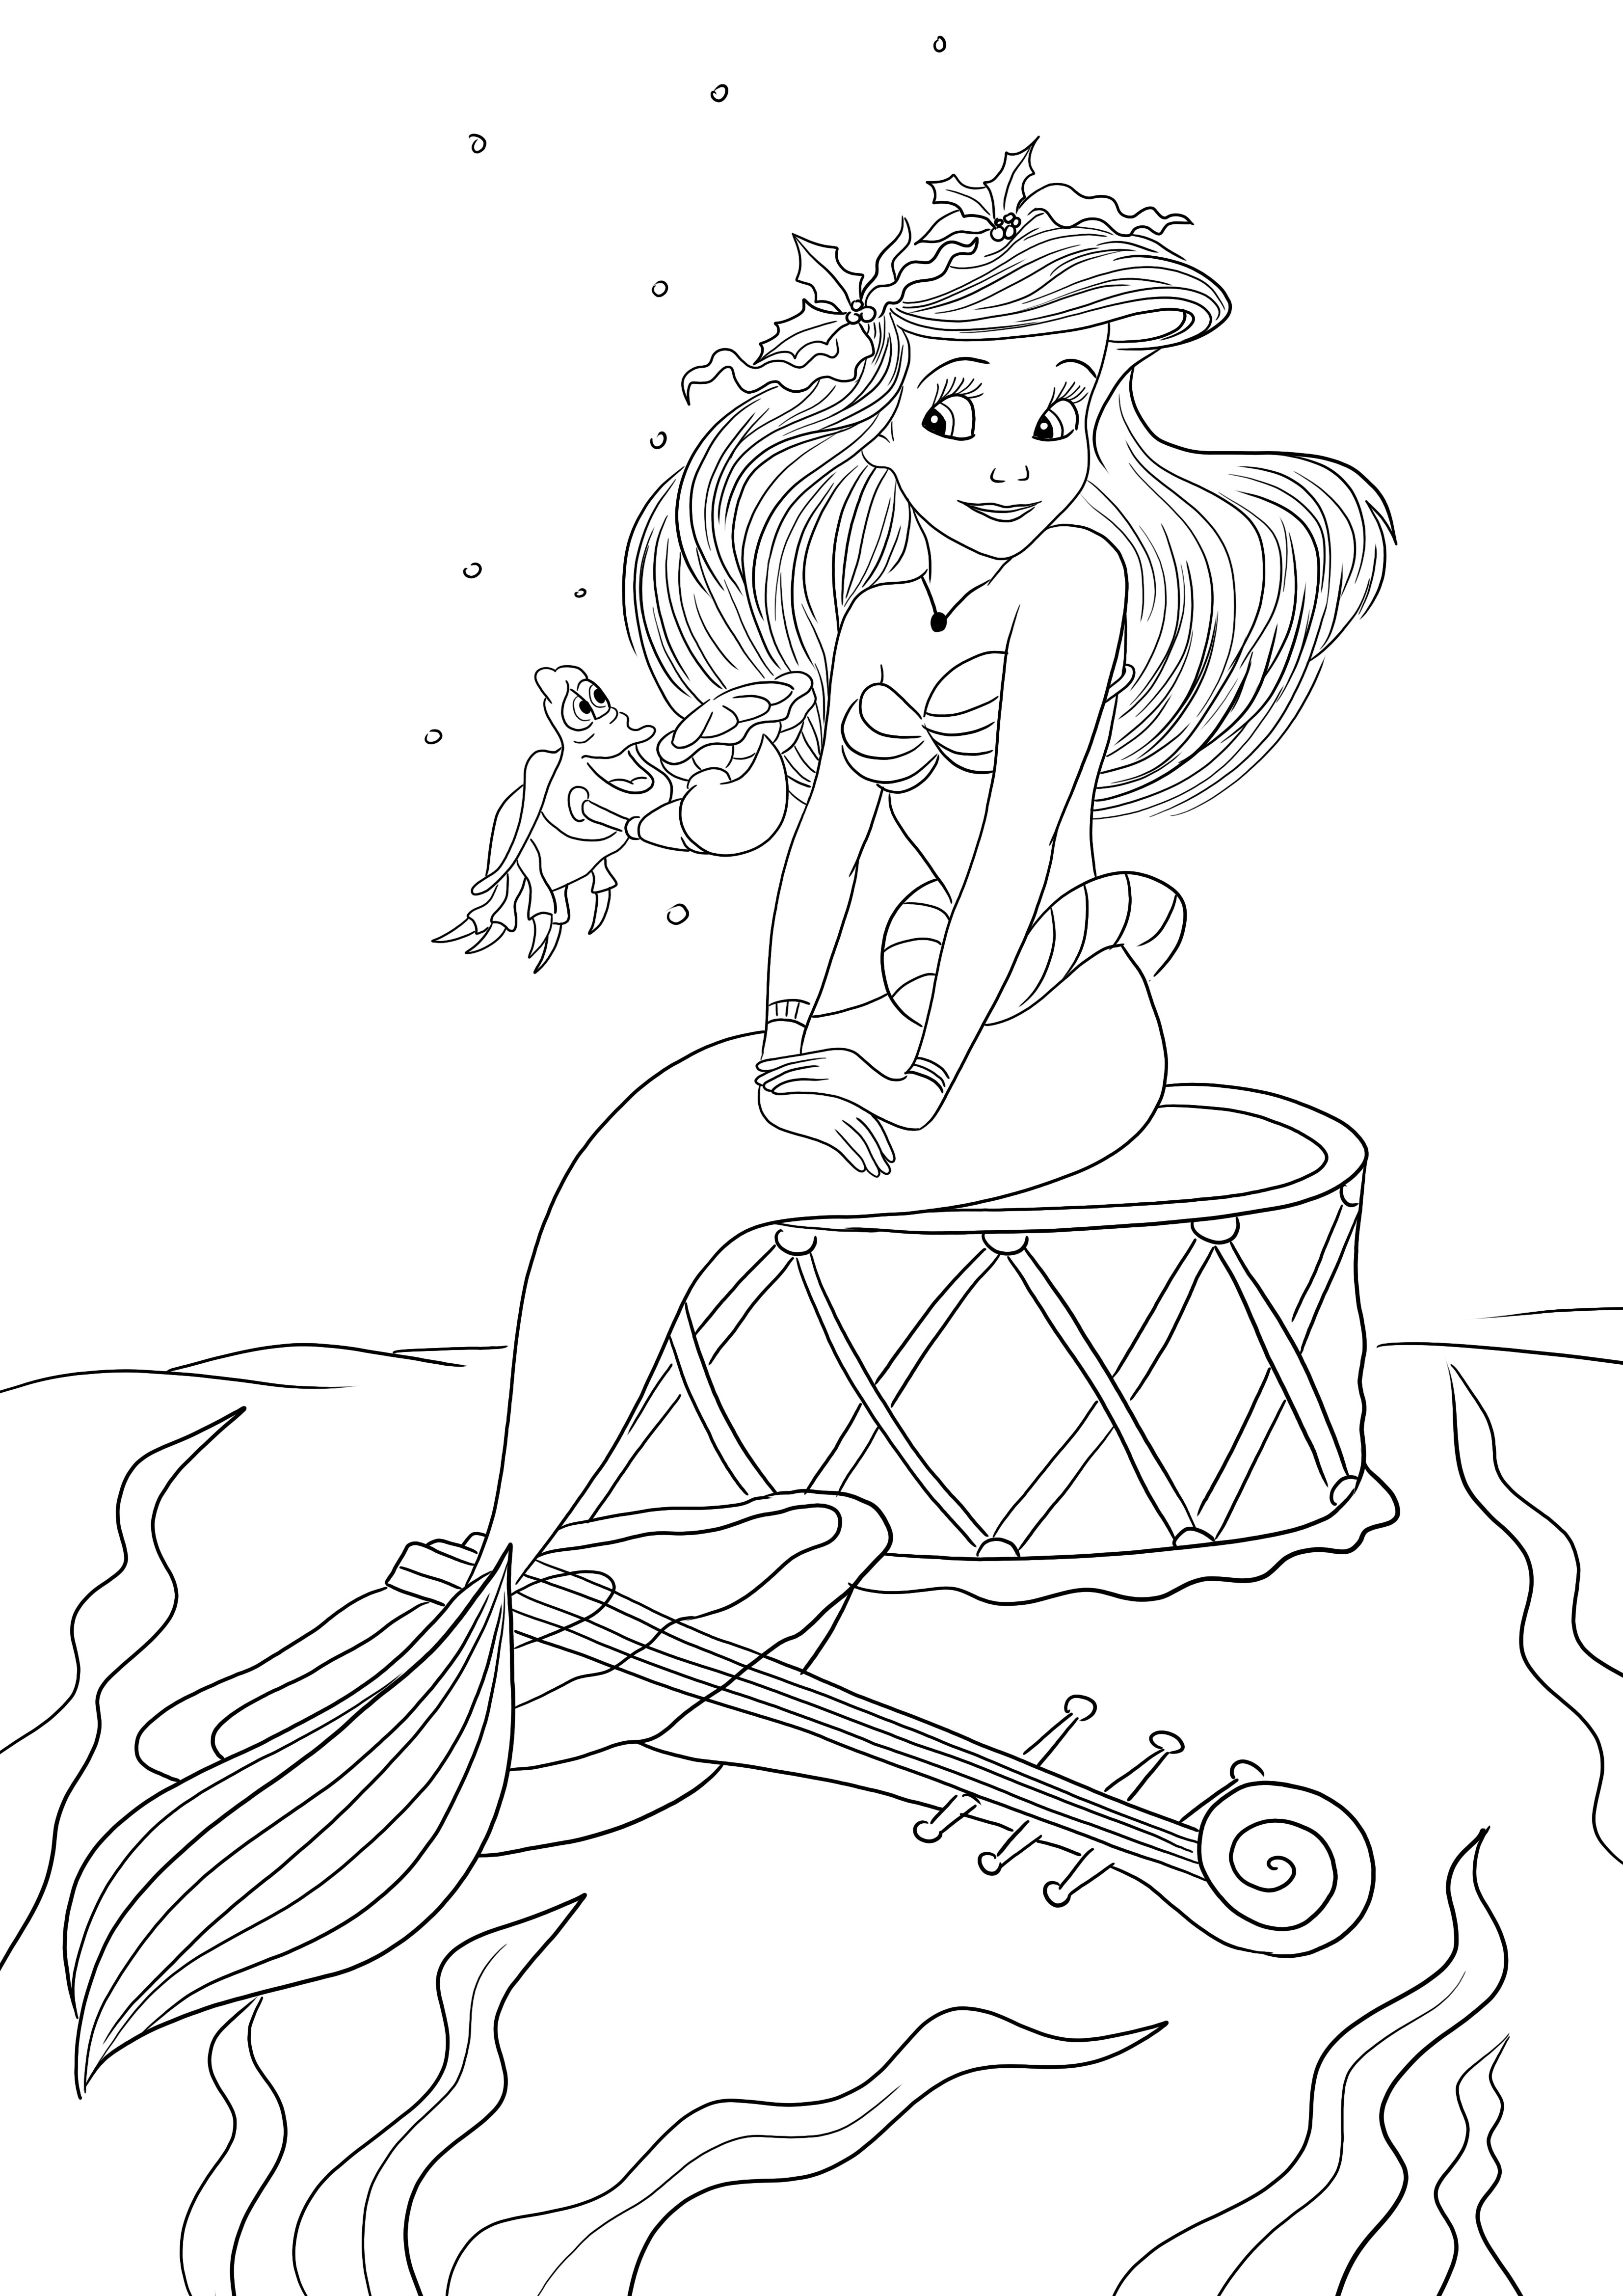 Coloring of Ariel the Mermaid for free printing or downloading page